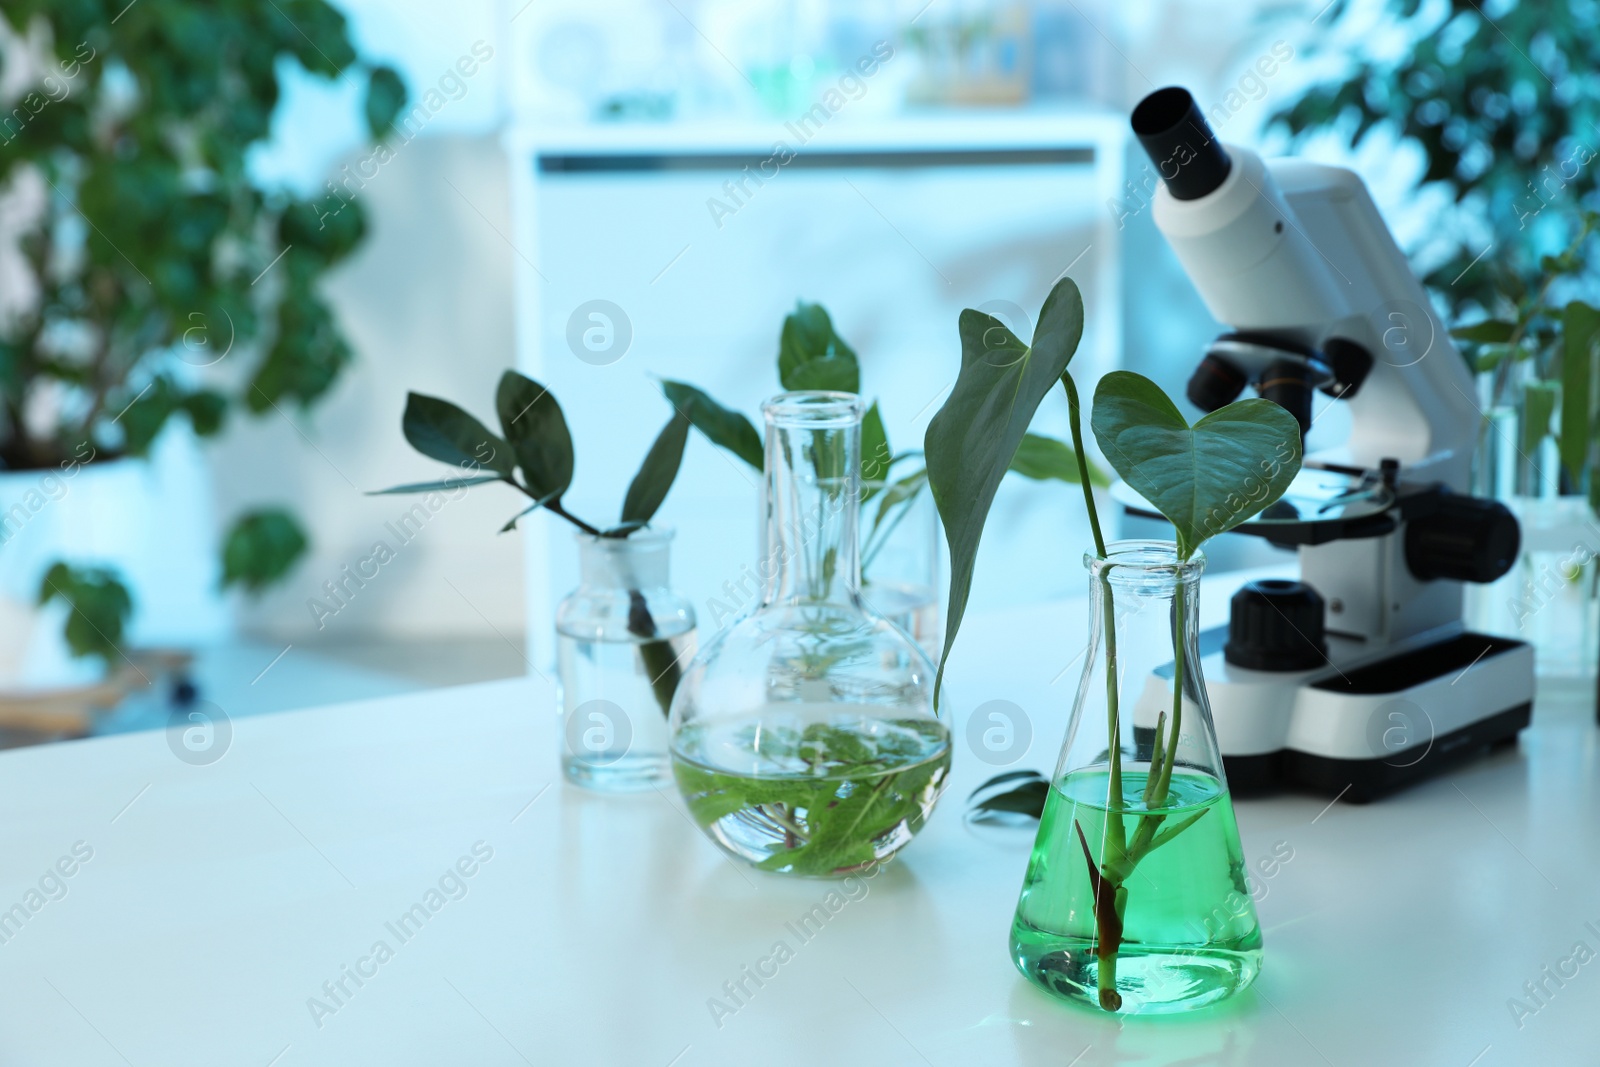 Photo of Laboratory glassware with plants and microscope on table, space for text. Biological chemistry